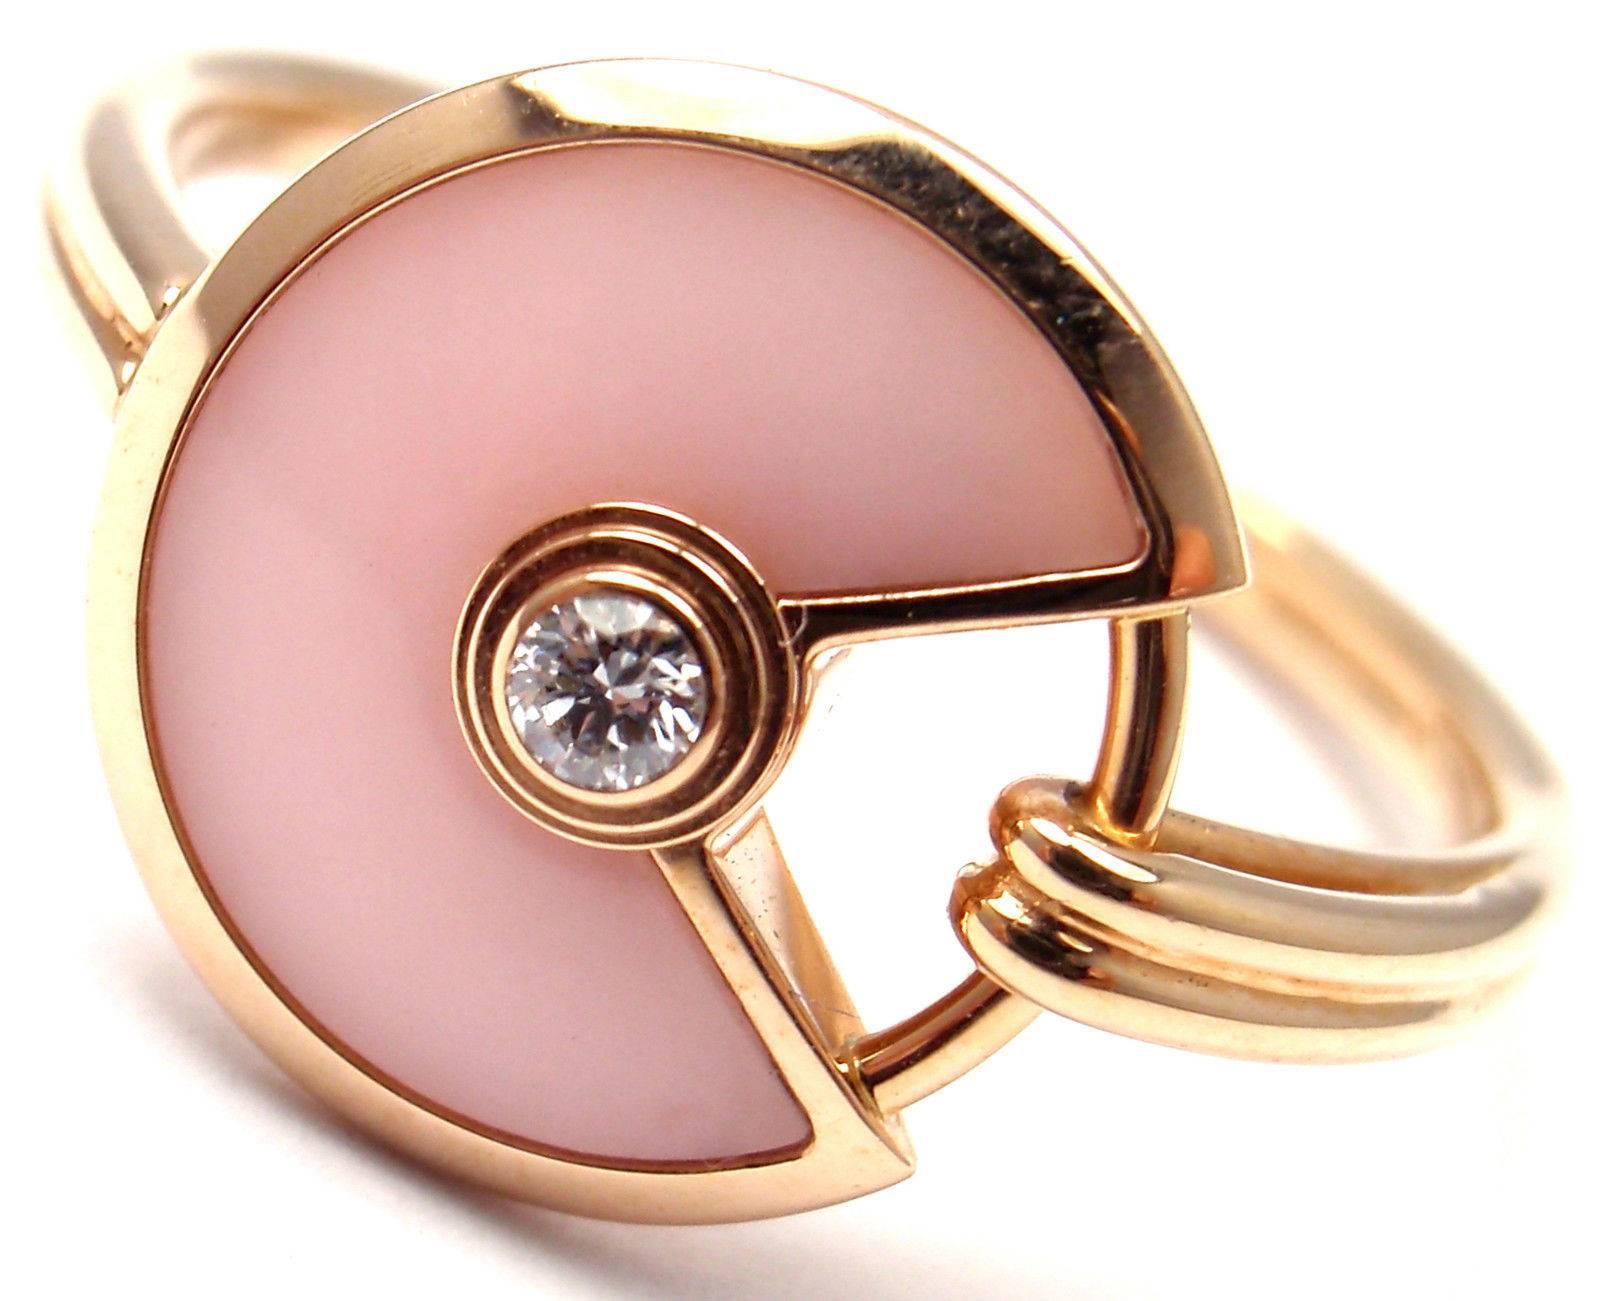 18k Rose Gold Diamond And Pink Opal Amulette de Cartier Ring by Cartier. 
With 1 Round brilliant cut diamonds VS1 clarity, G color total weight approximately .02ct And Pink Opal
This ring comes with Cartier box.

Details: 
Size:  European 55,